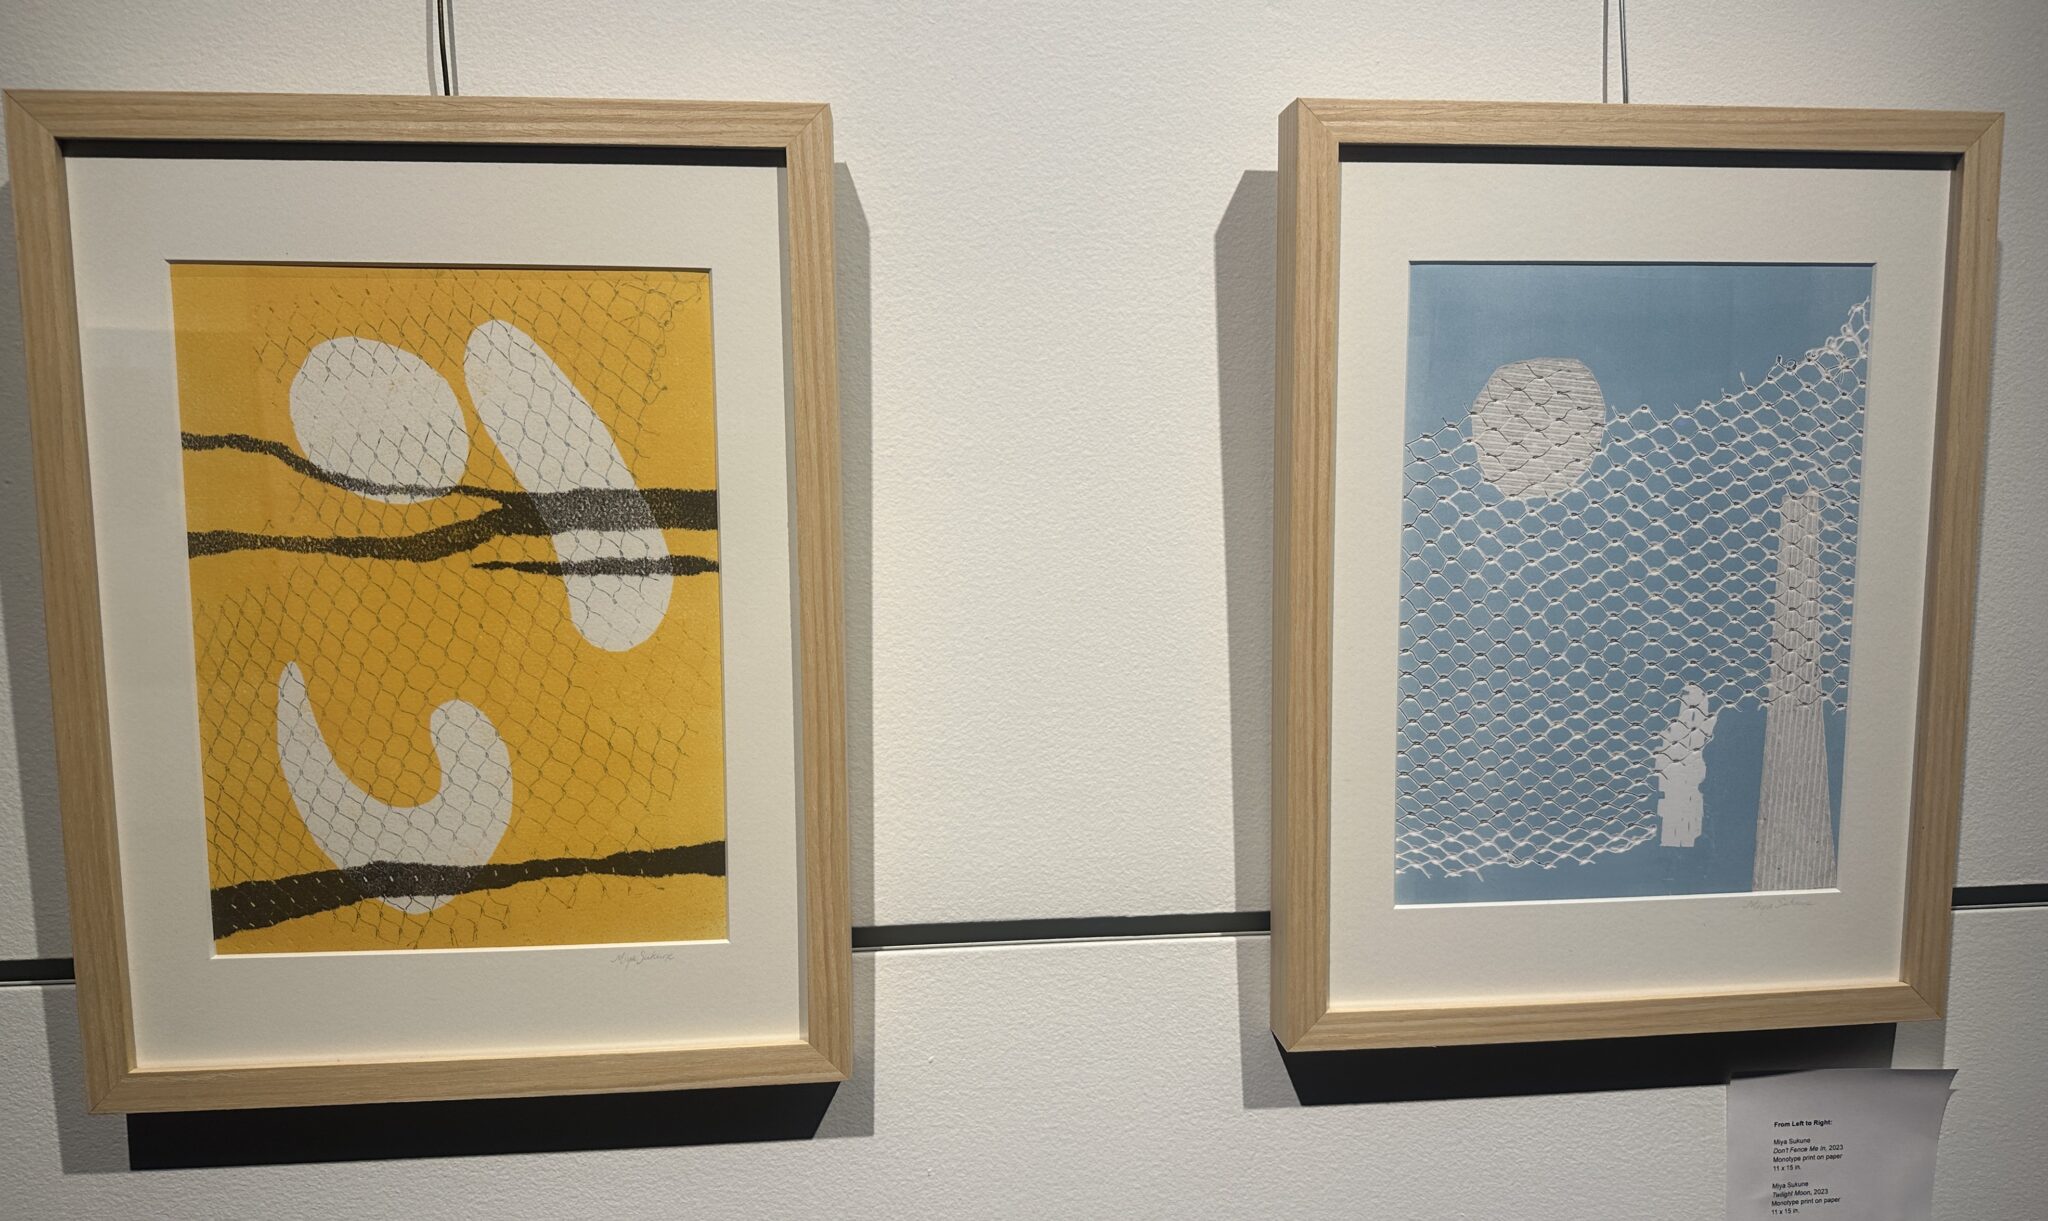 2 framed Monotype prints by Miya Sukune are featured.